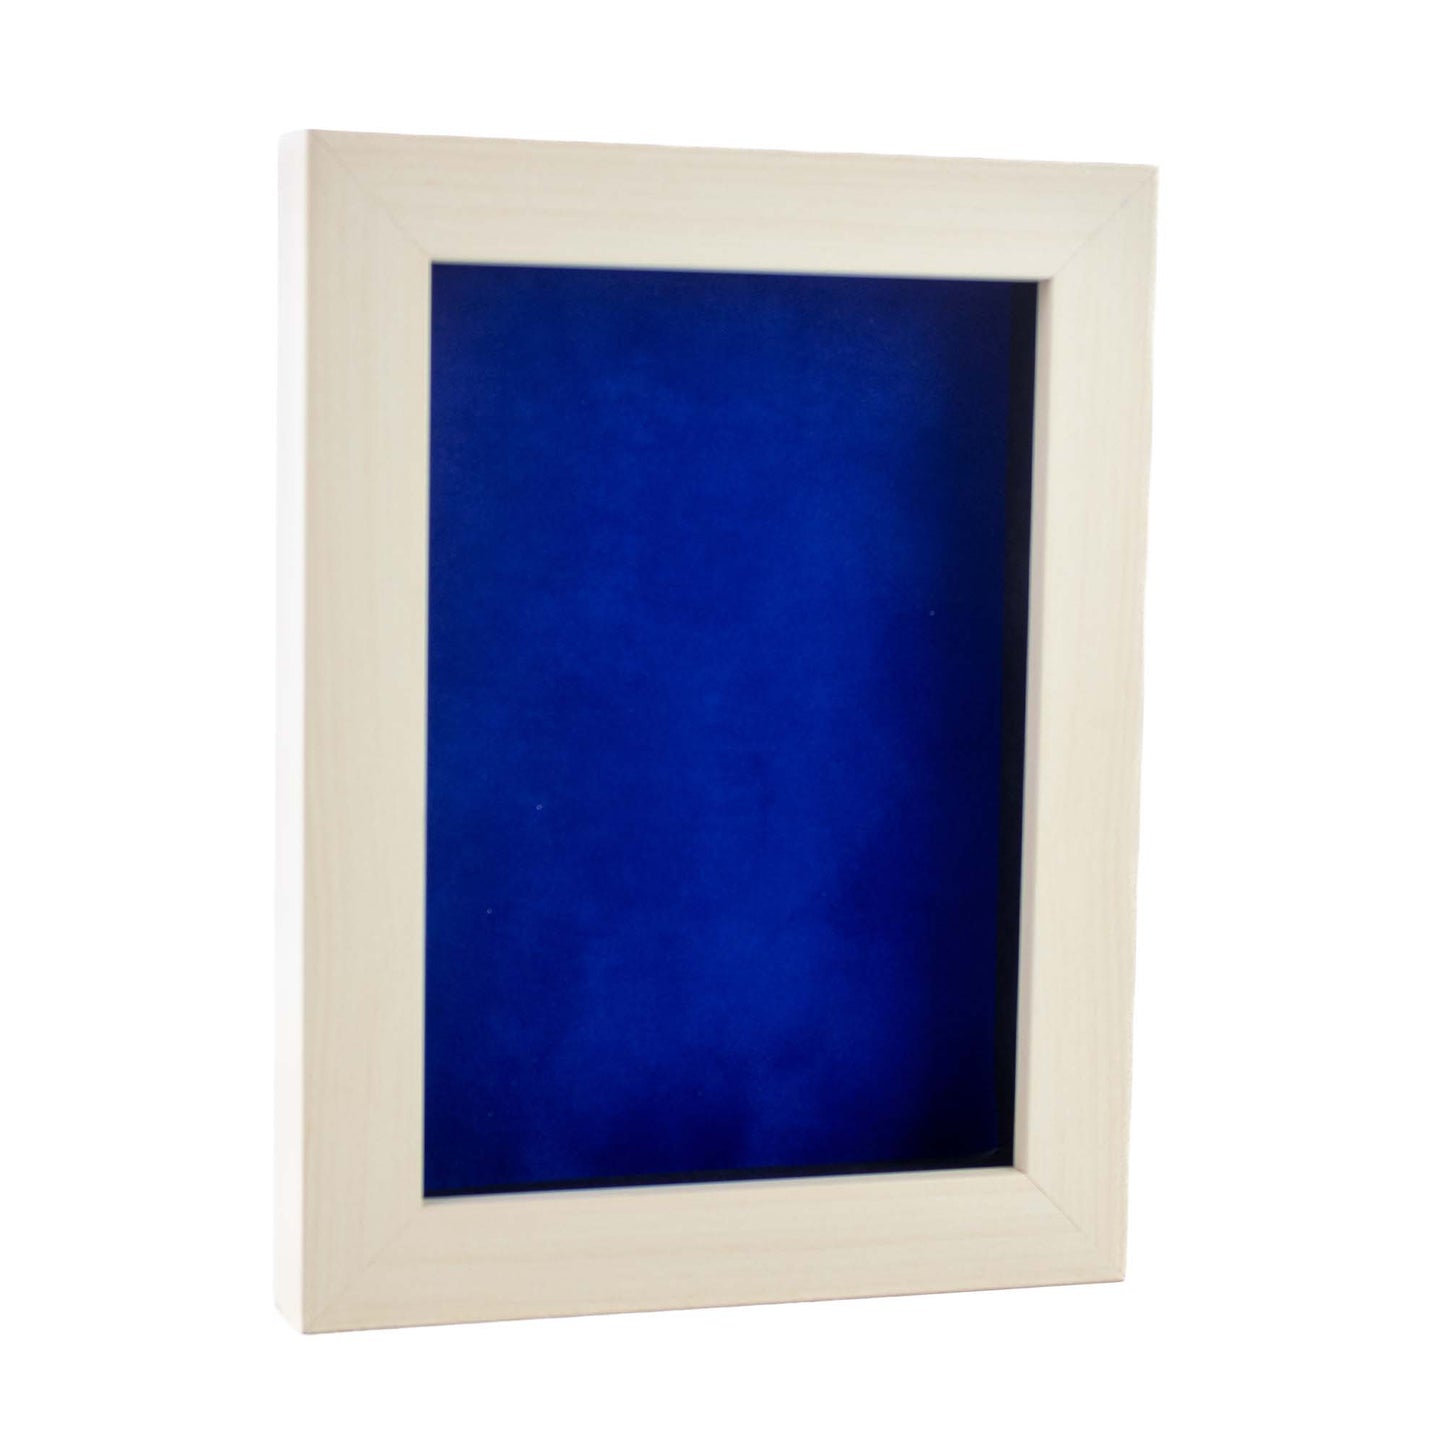 White Washed Shadow Box Frame With Royal Blue Acid-Free Suede Backing